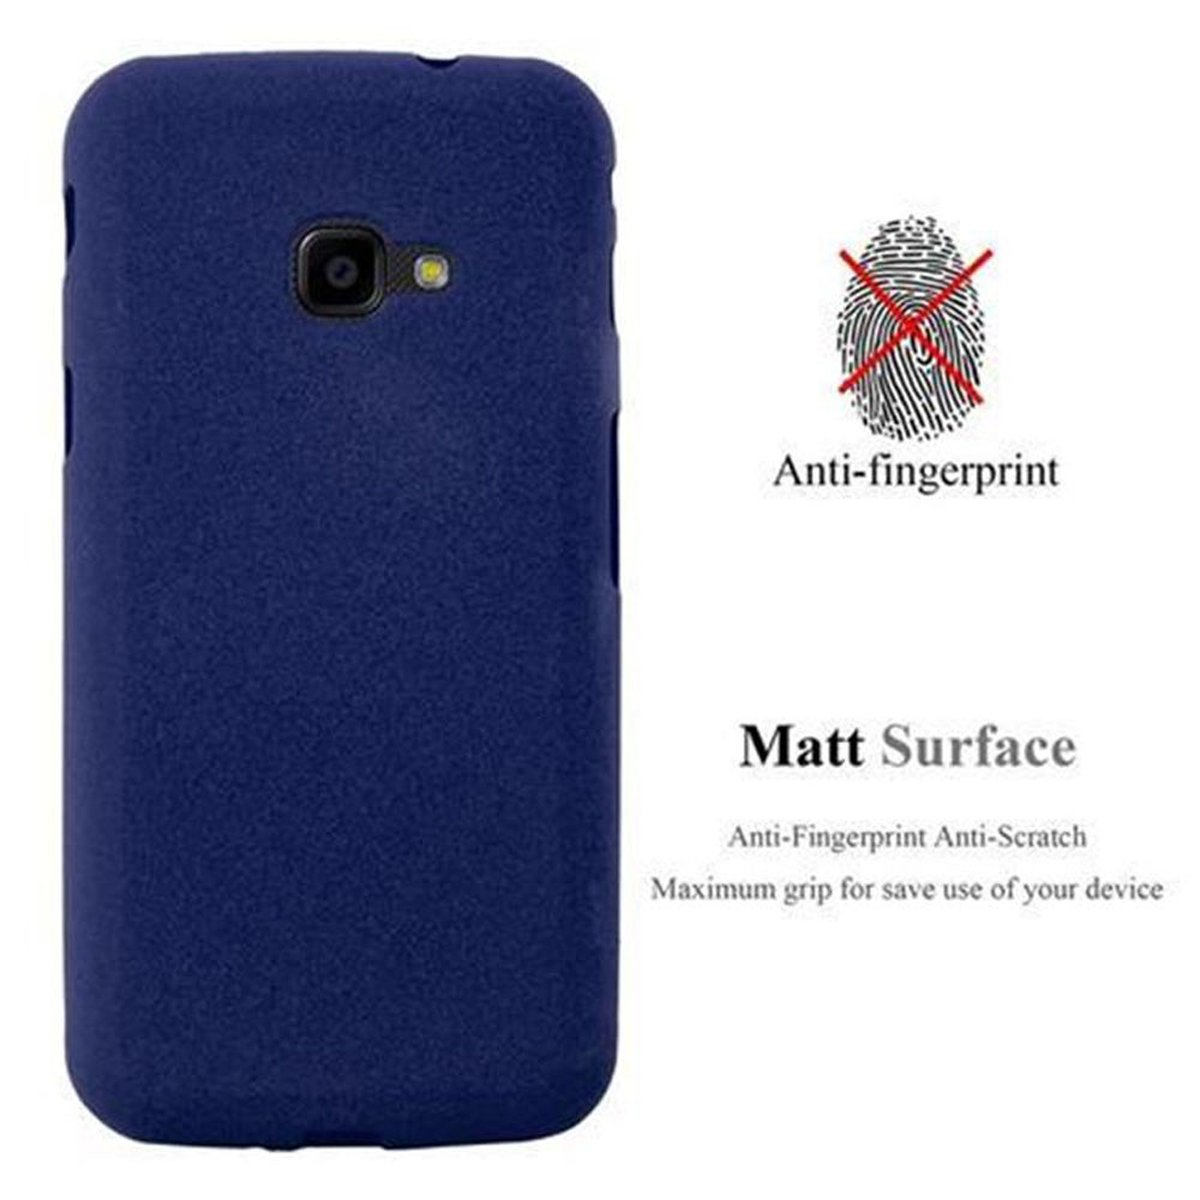 CADORABO TPU BLAU 4 FROST DUNKEL 4s, Samsung, Galaxy XCover Schutzhülle, XCover Frosted / Backcover